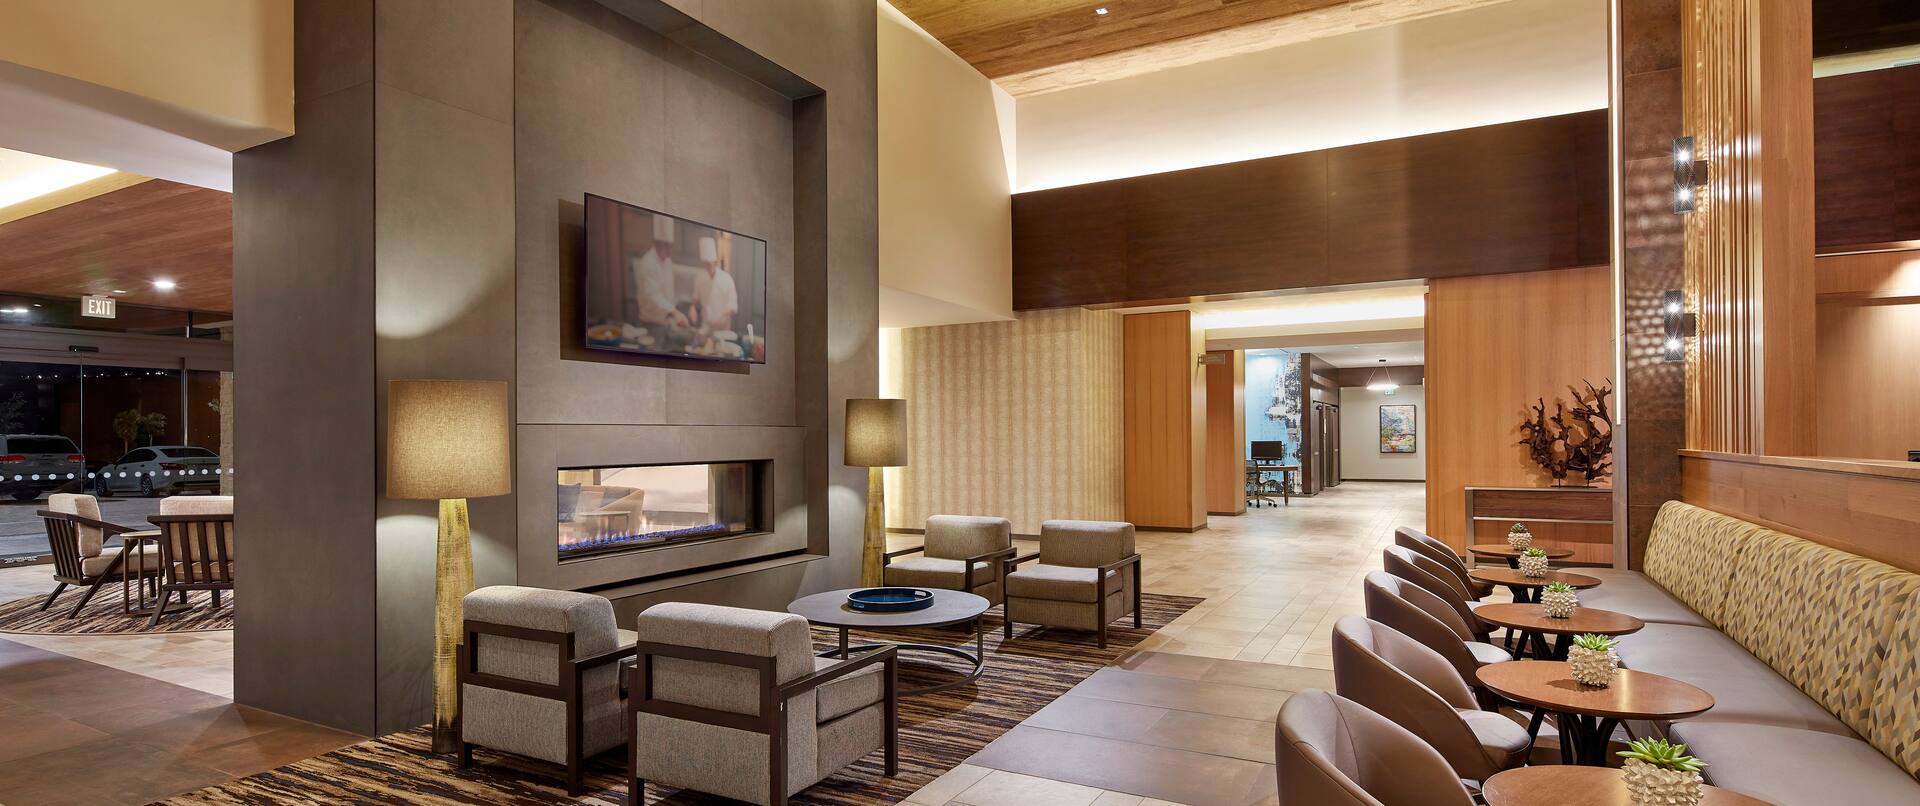 Two-sided Fireplace in the Lobby with Accent Table and Soft Seating, Small Round Dining Tables with Chairs and Booth style Seating